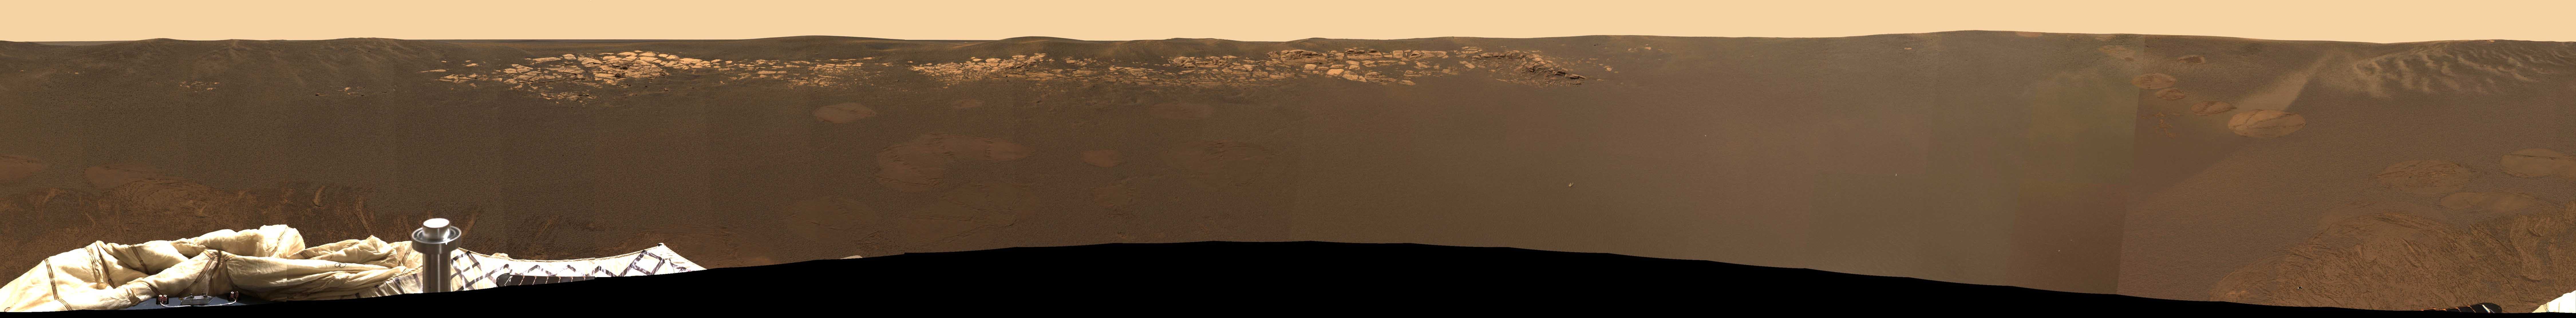 Espace As Far As Opportunity's Eye Can See